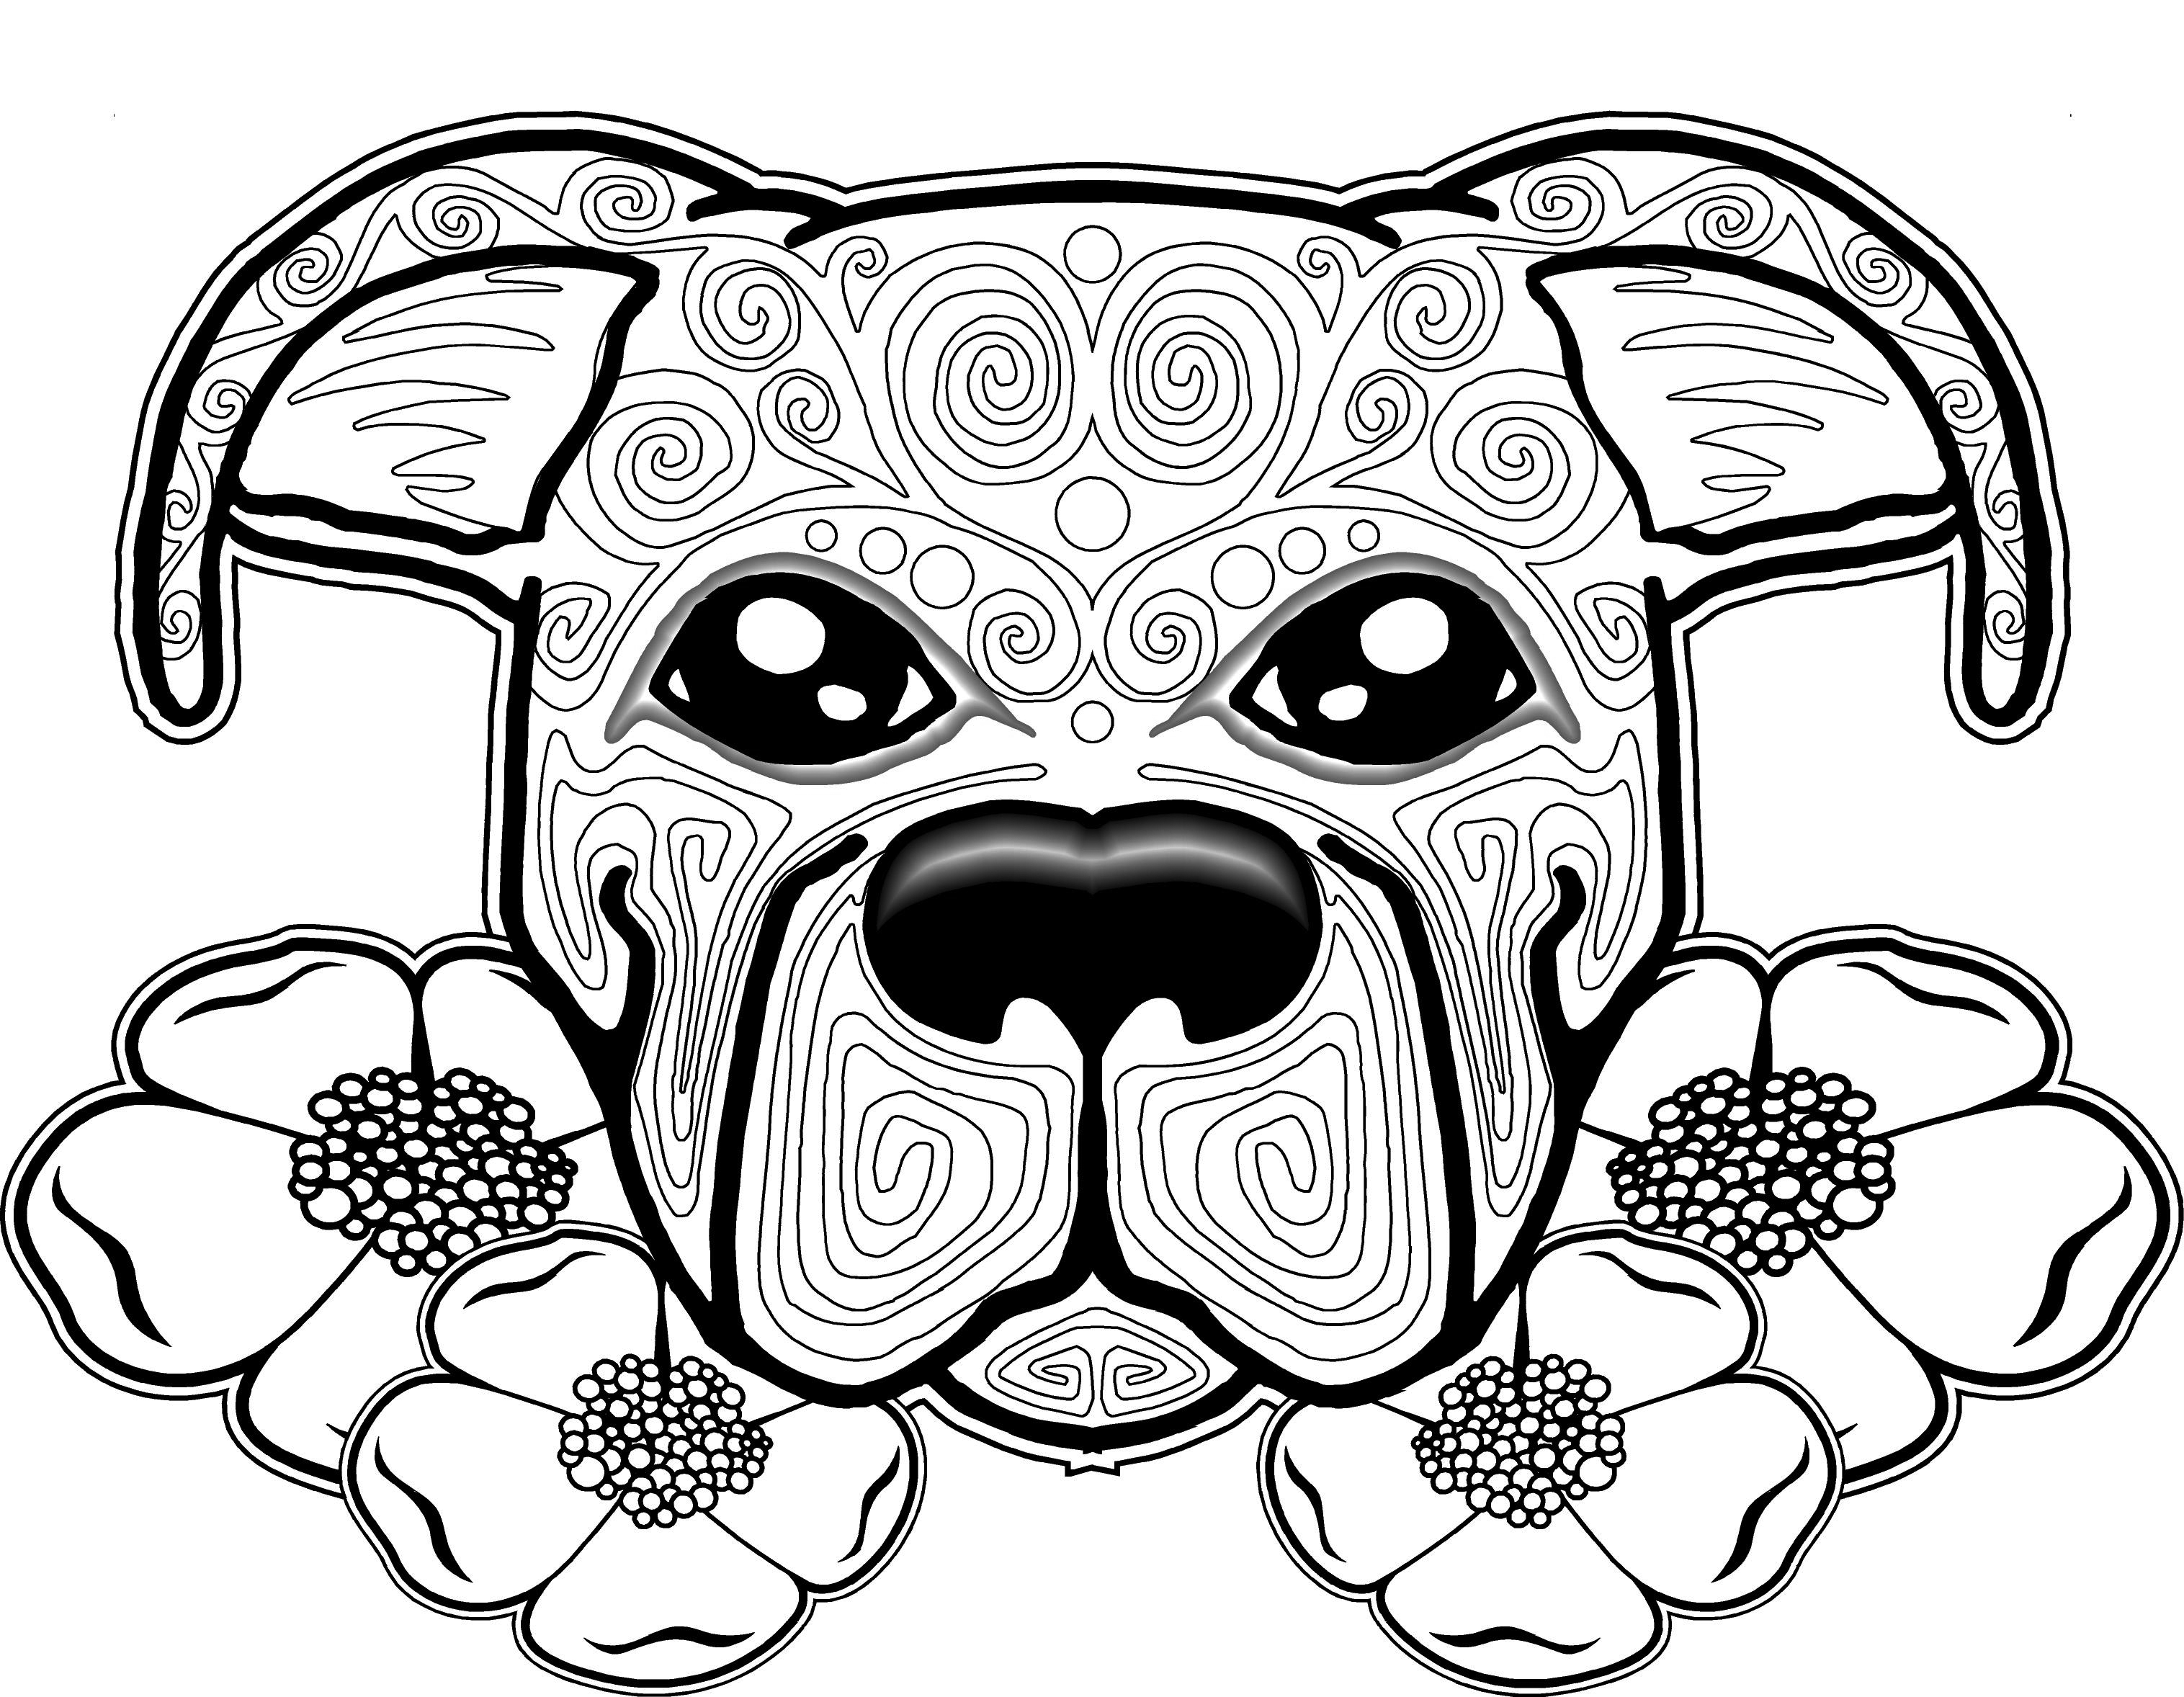 Dog Coloring Pages For Adults at GetColorings.com | Free printable